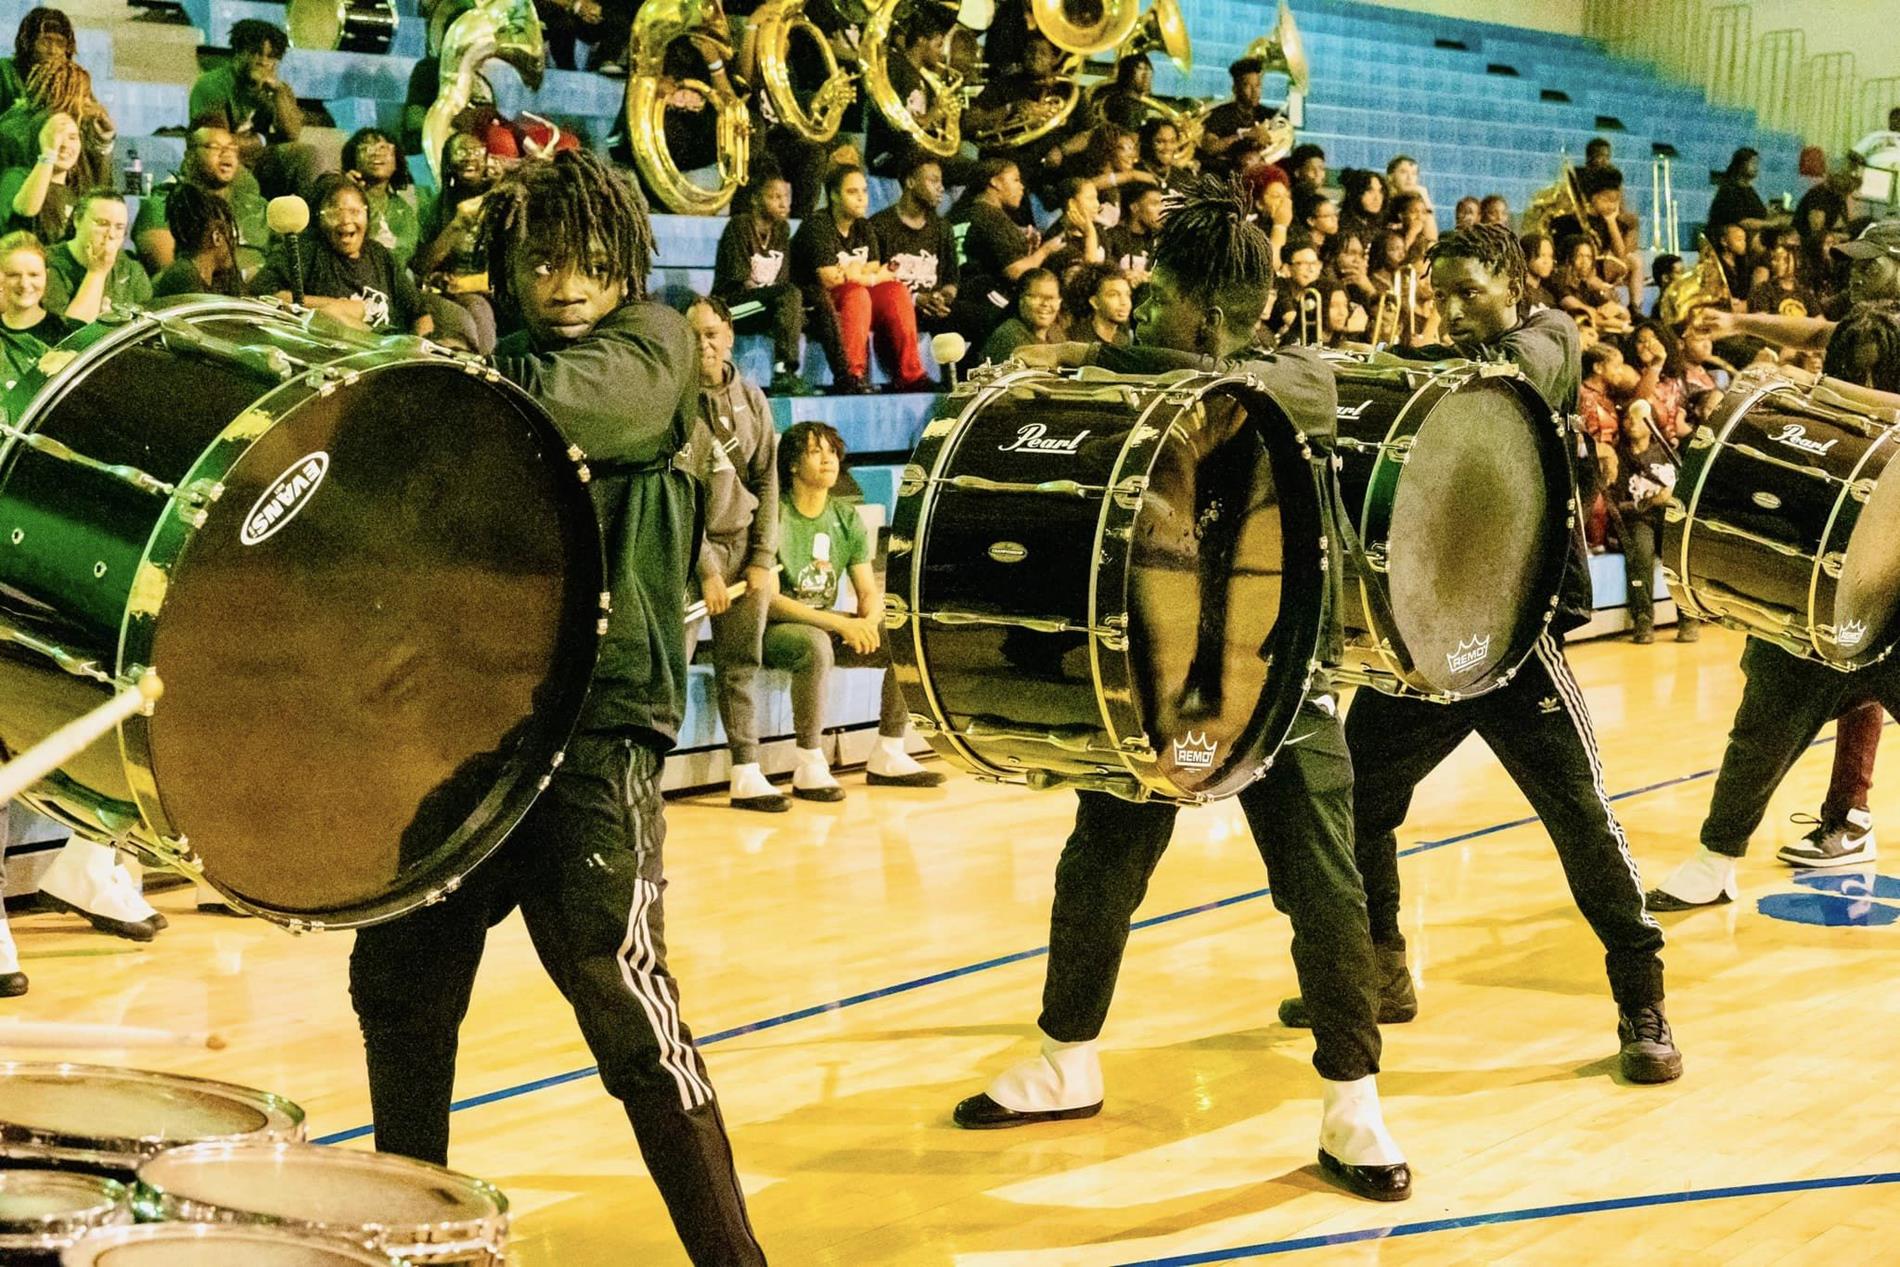 KHS 'River of Soul' Marching Band performs during a pep rally.